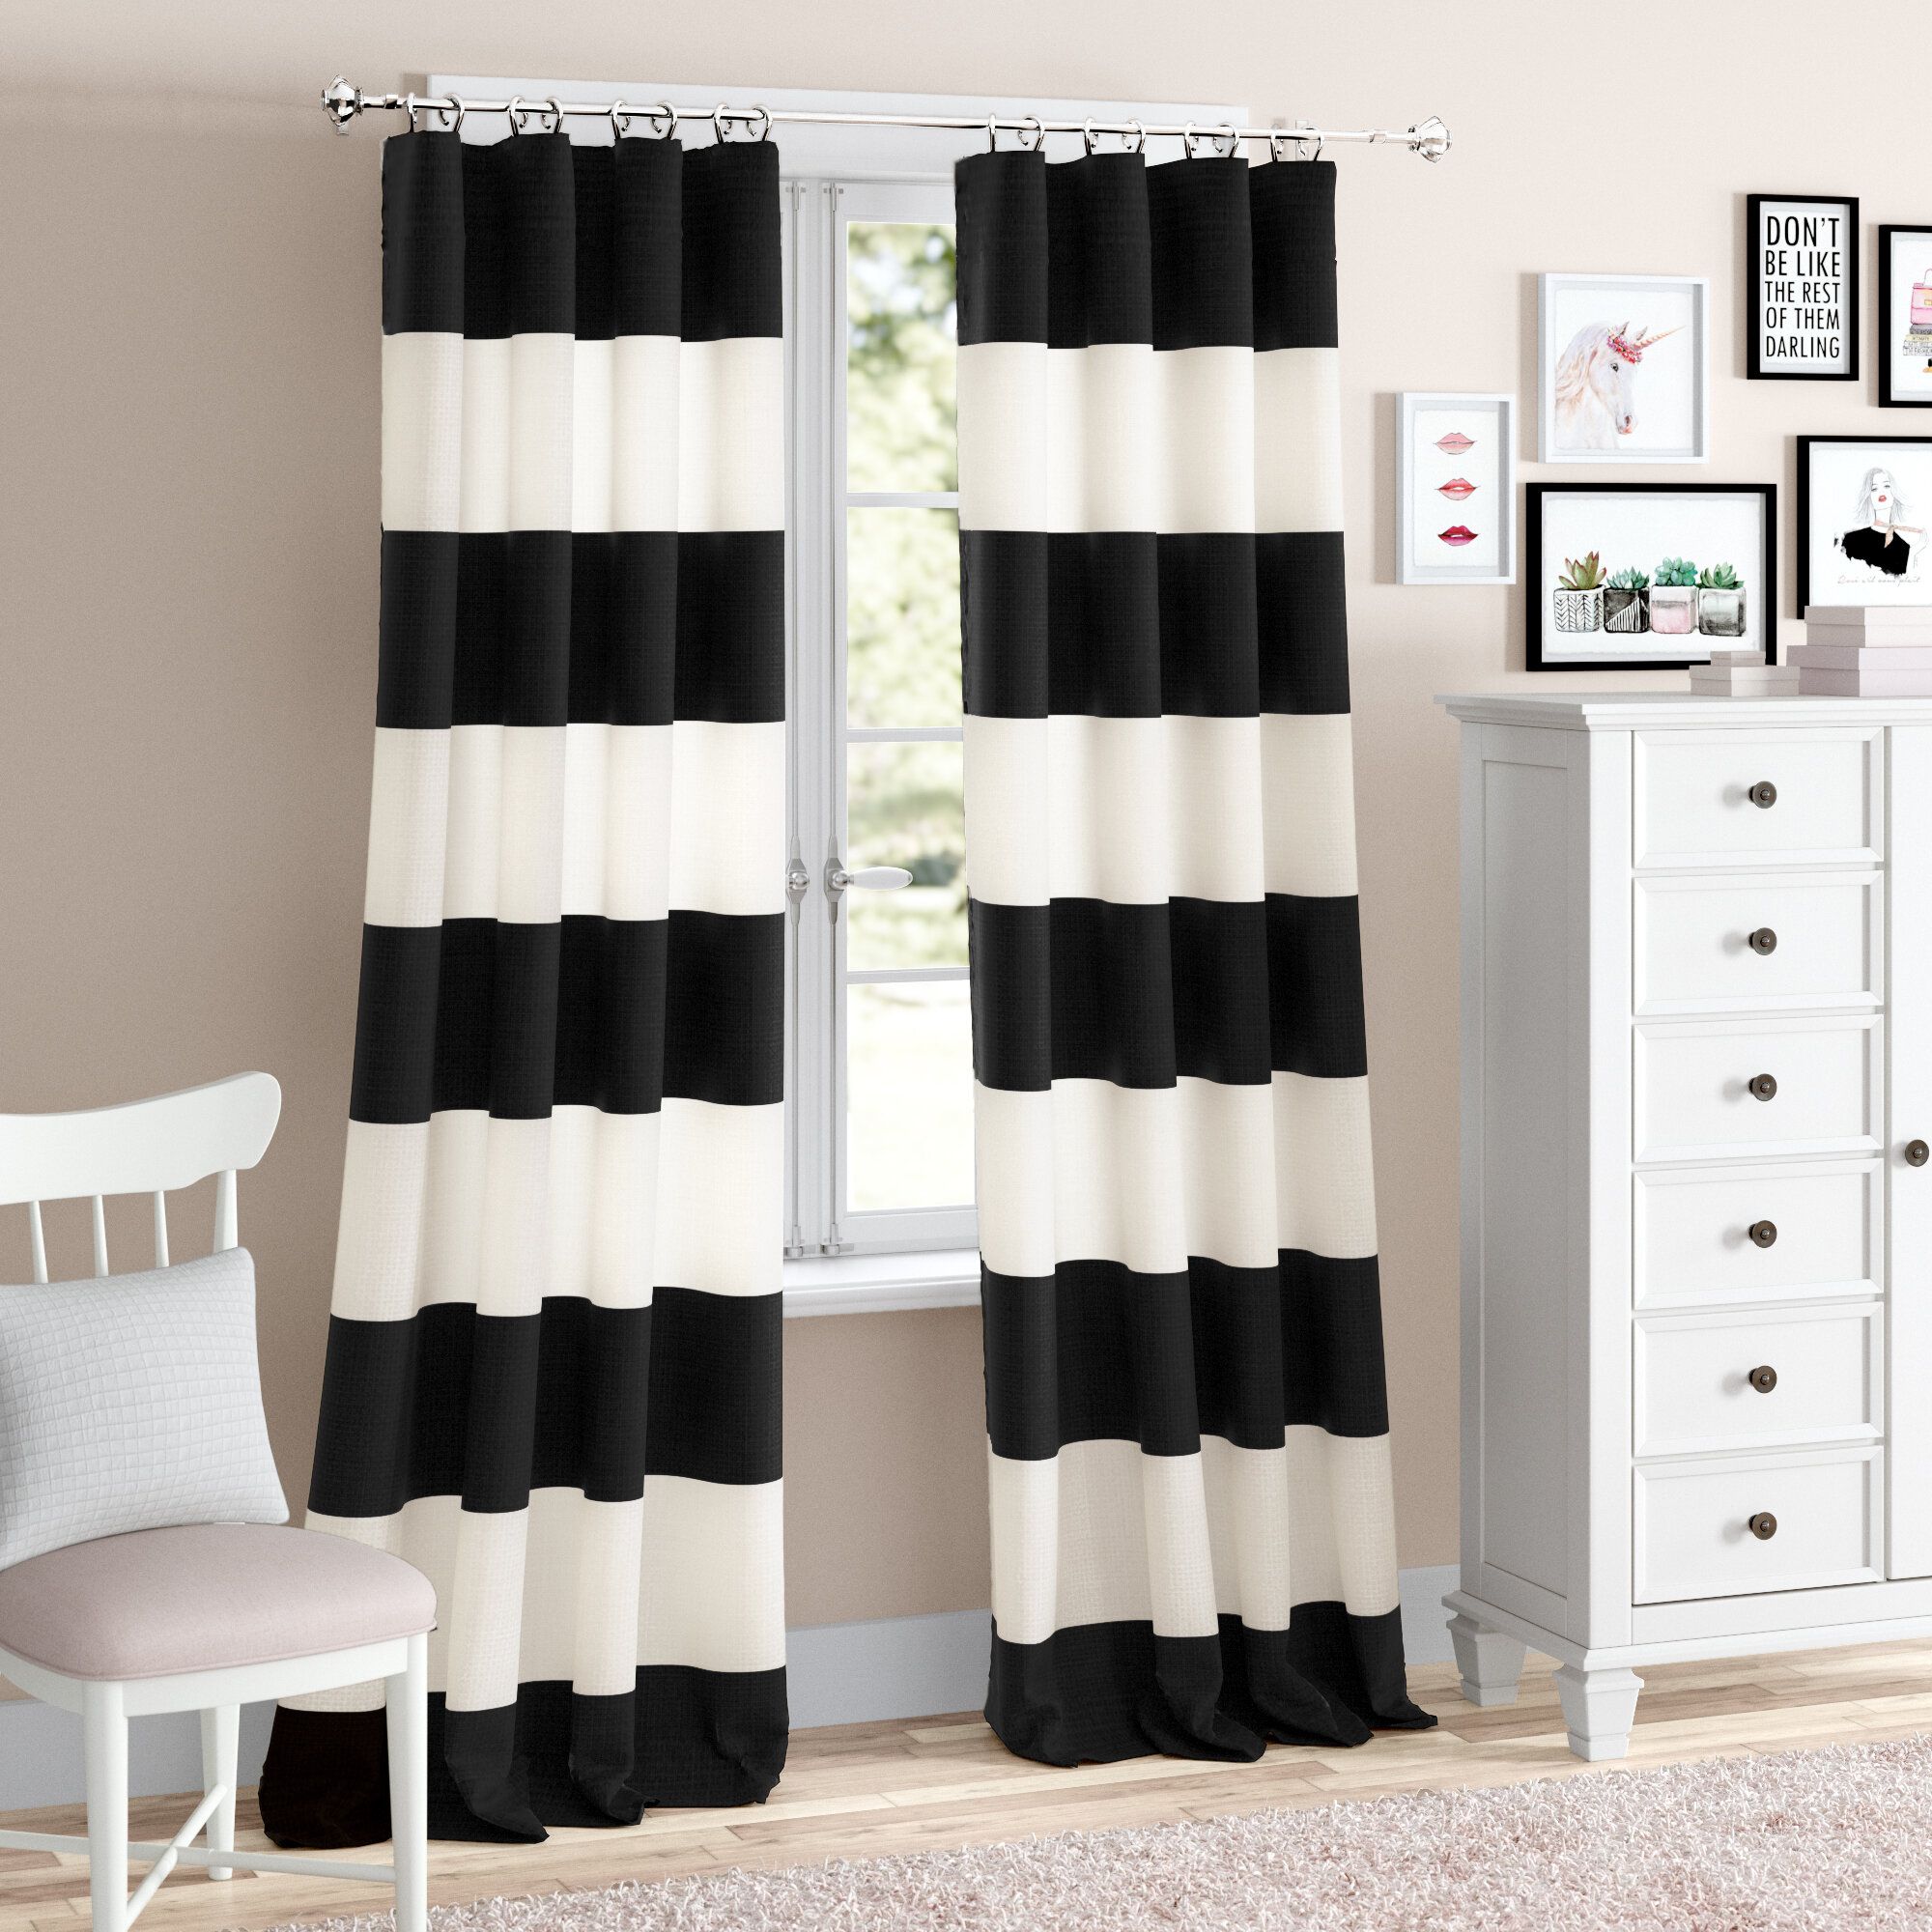 Slate Curtains | Wayfair Inside Cyrus Thermal Blackout Back Tab Curtain Panels (View 19 of 20)